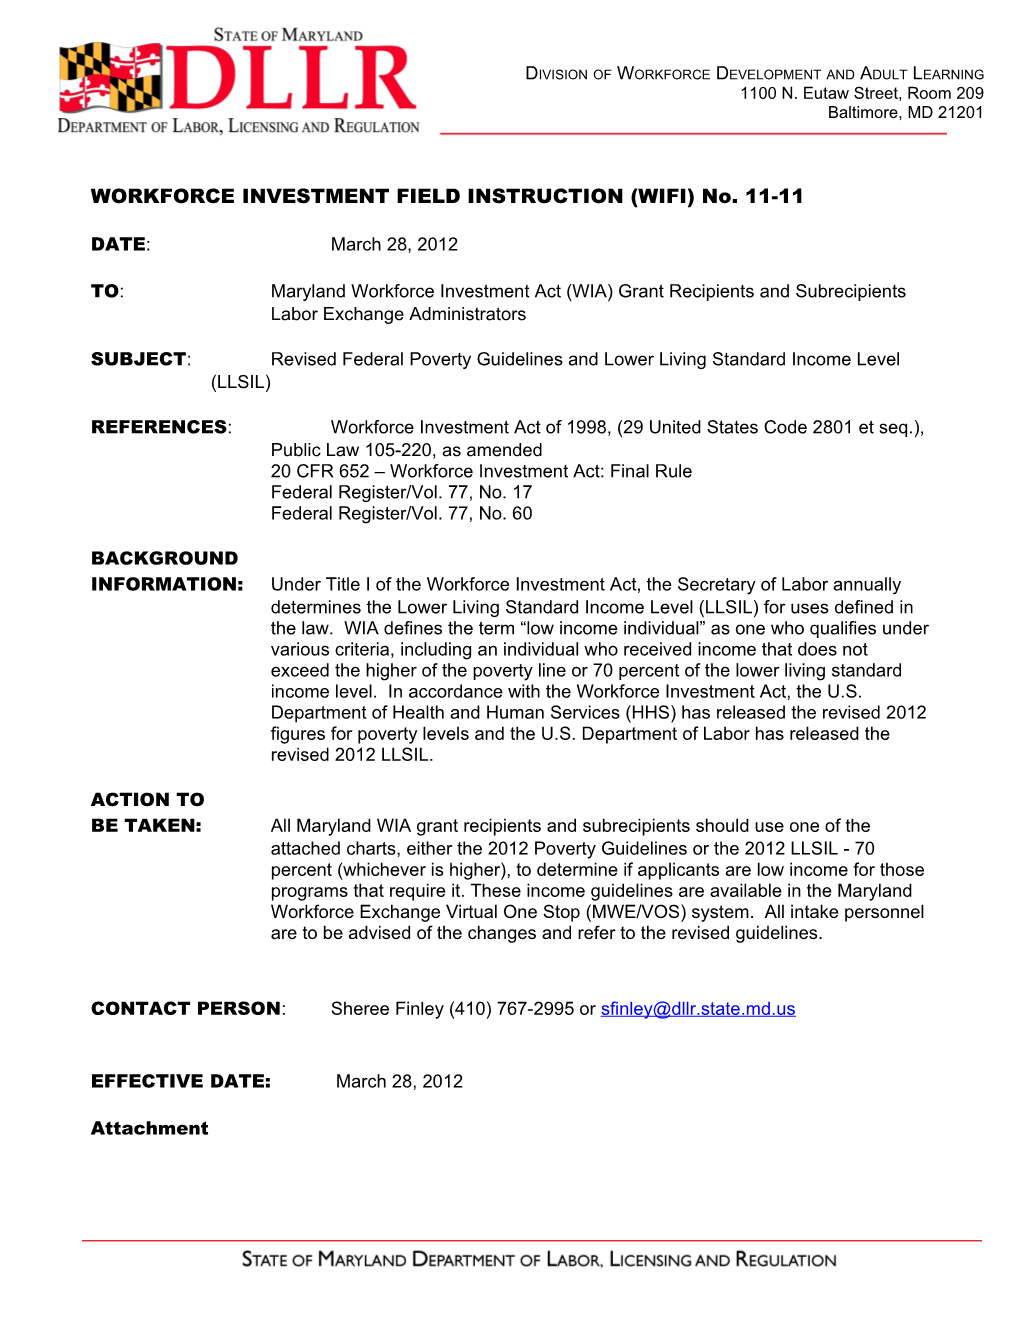 WORKFORCE INVESTMENT FIELD INSTRUCTION (WIFI) No. 11-11